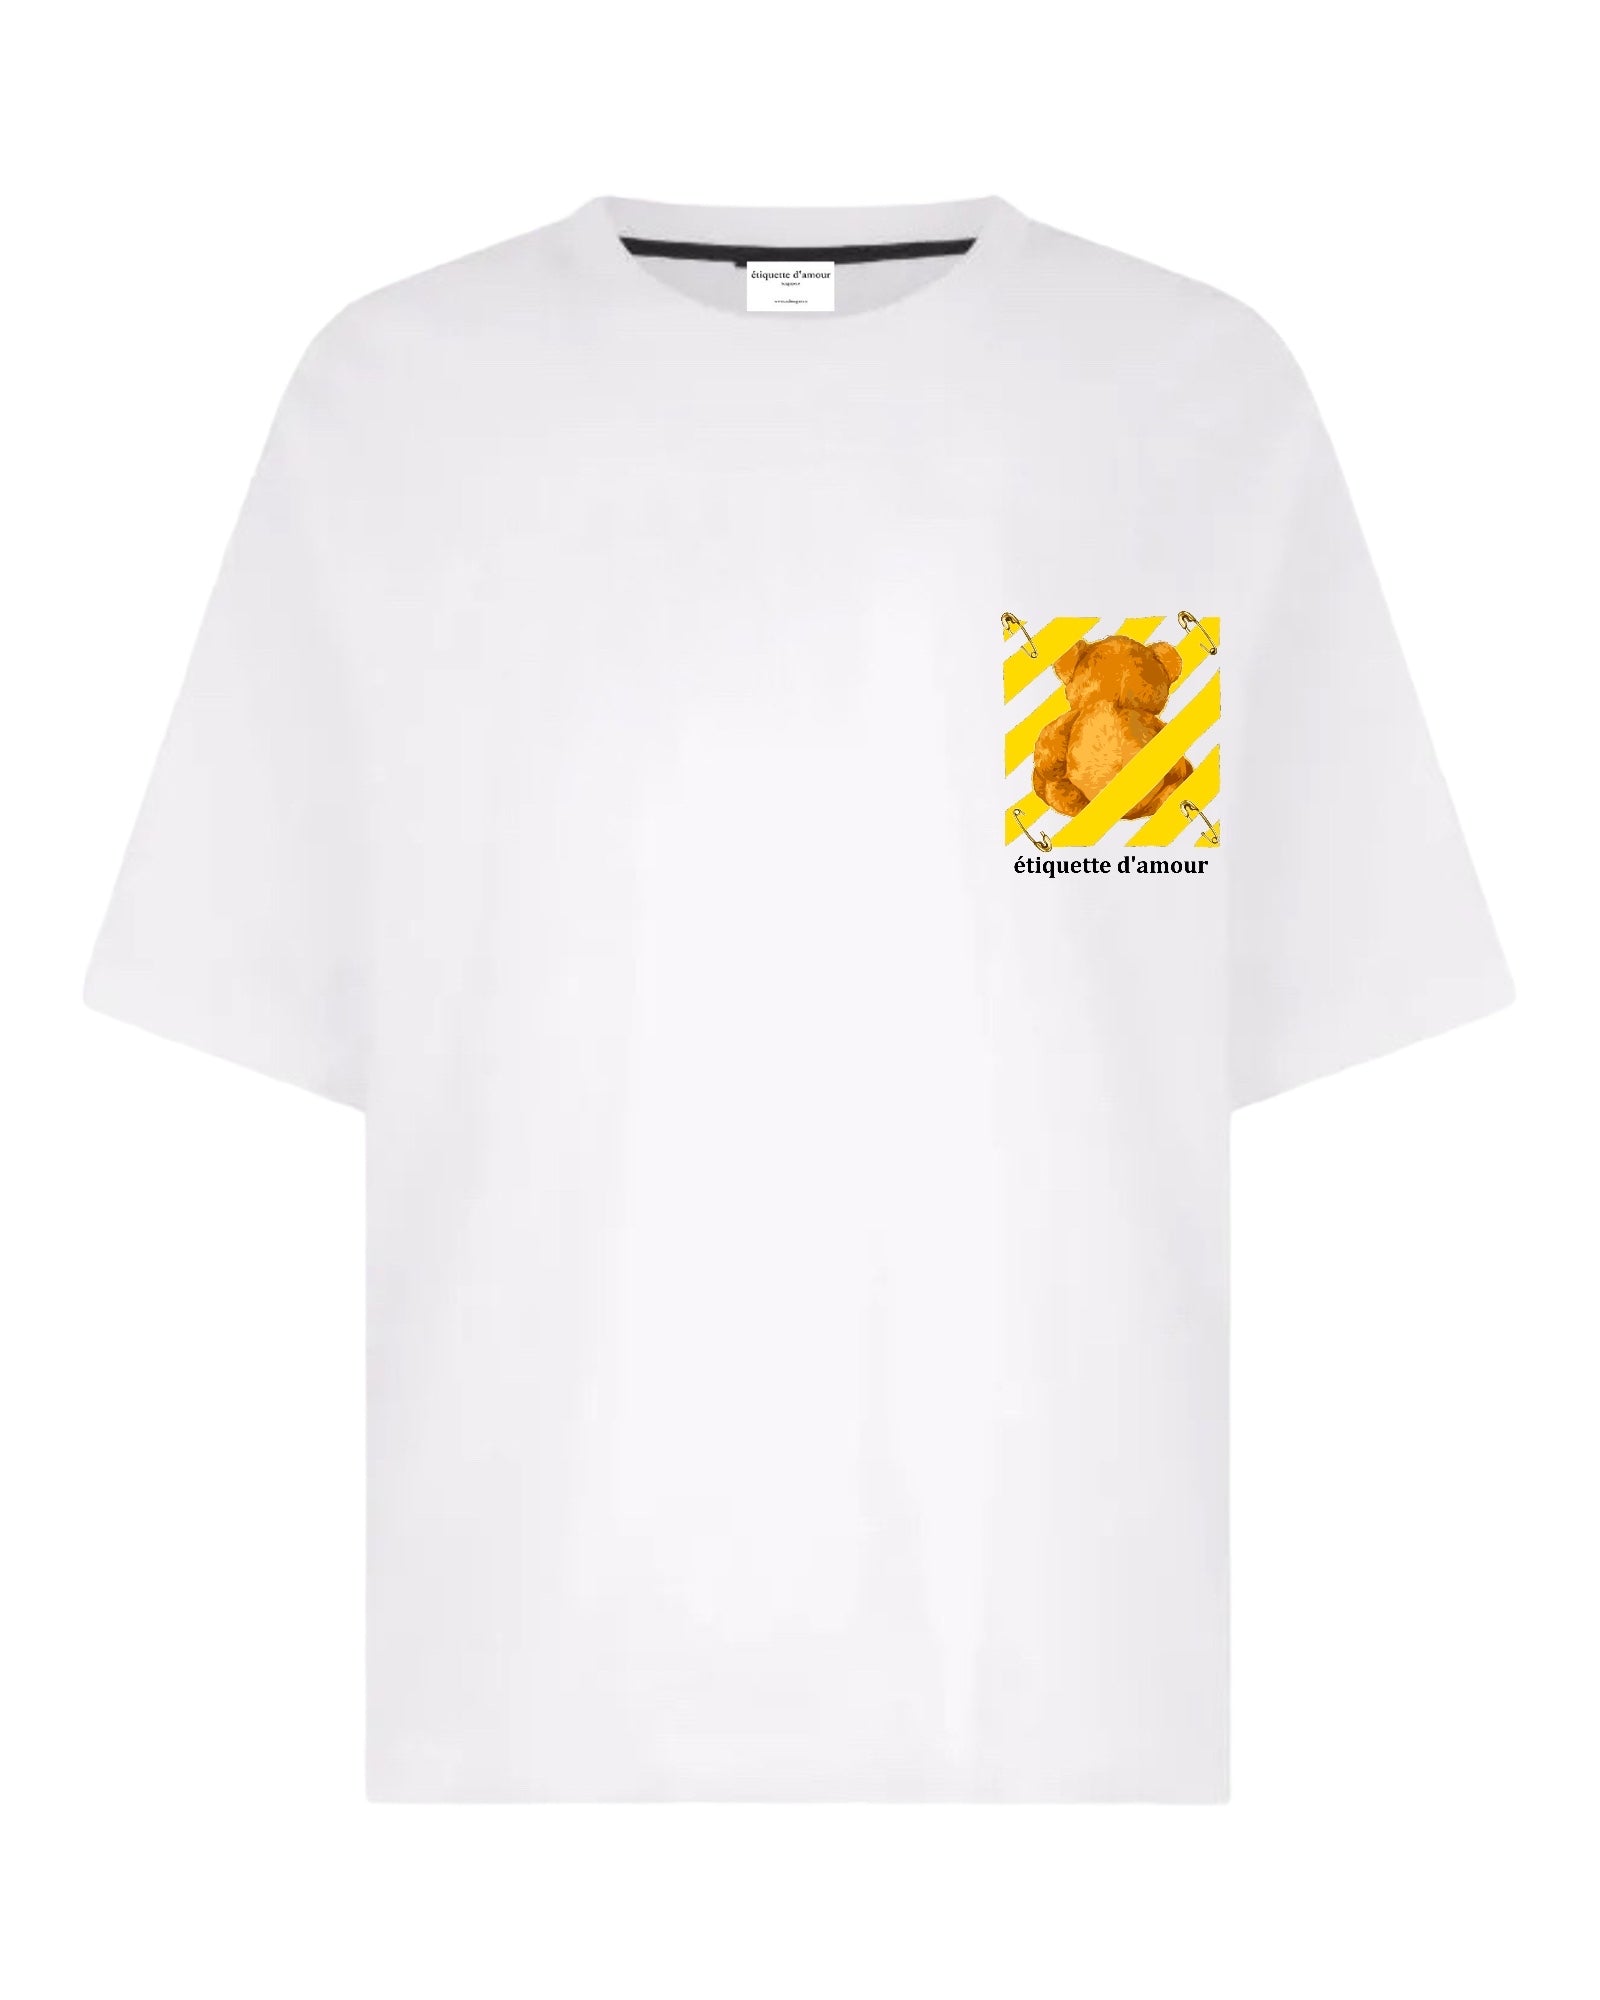 Exclusive Release T-Shirt #0005